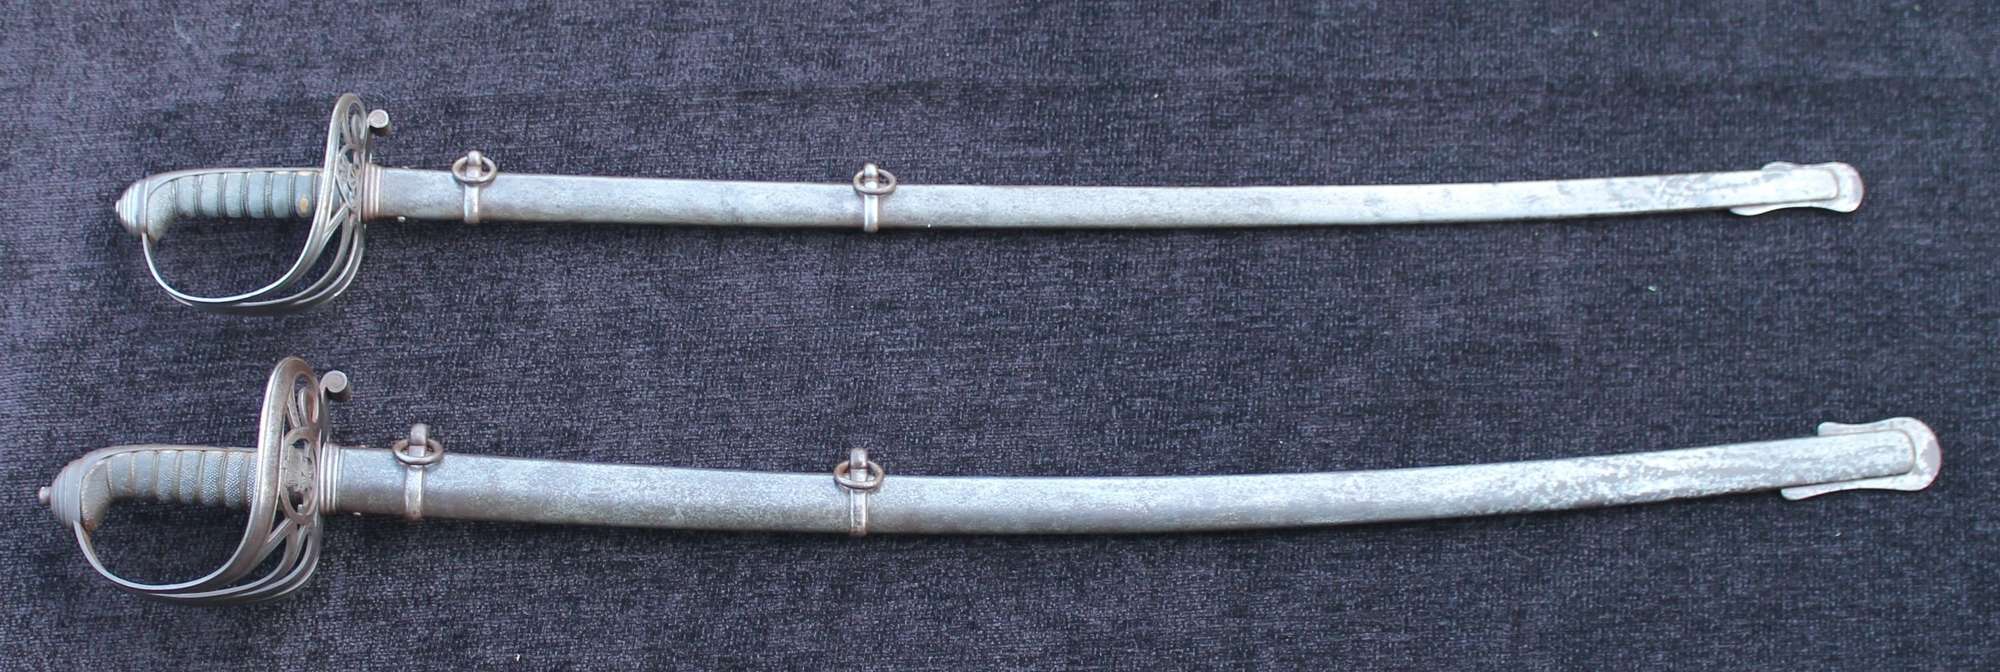 A PAIR Of Swords To The 7th Surrey Rifle Volunteers